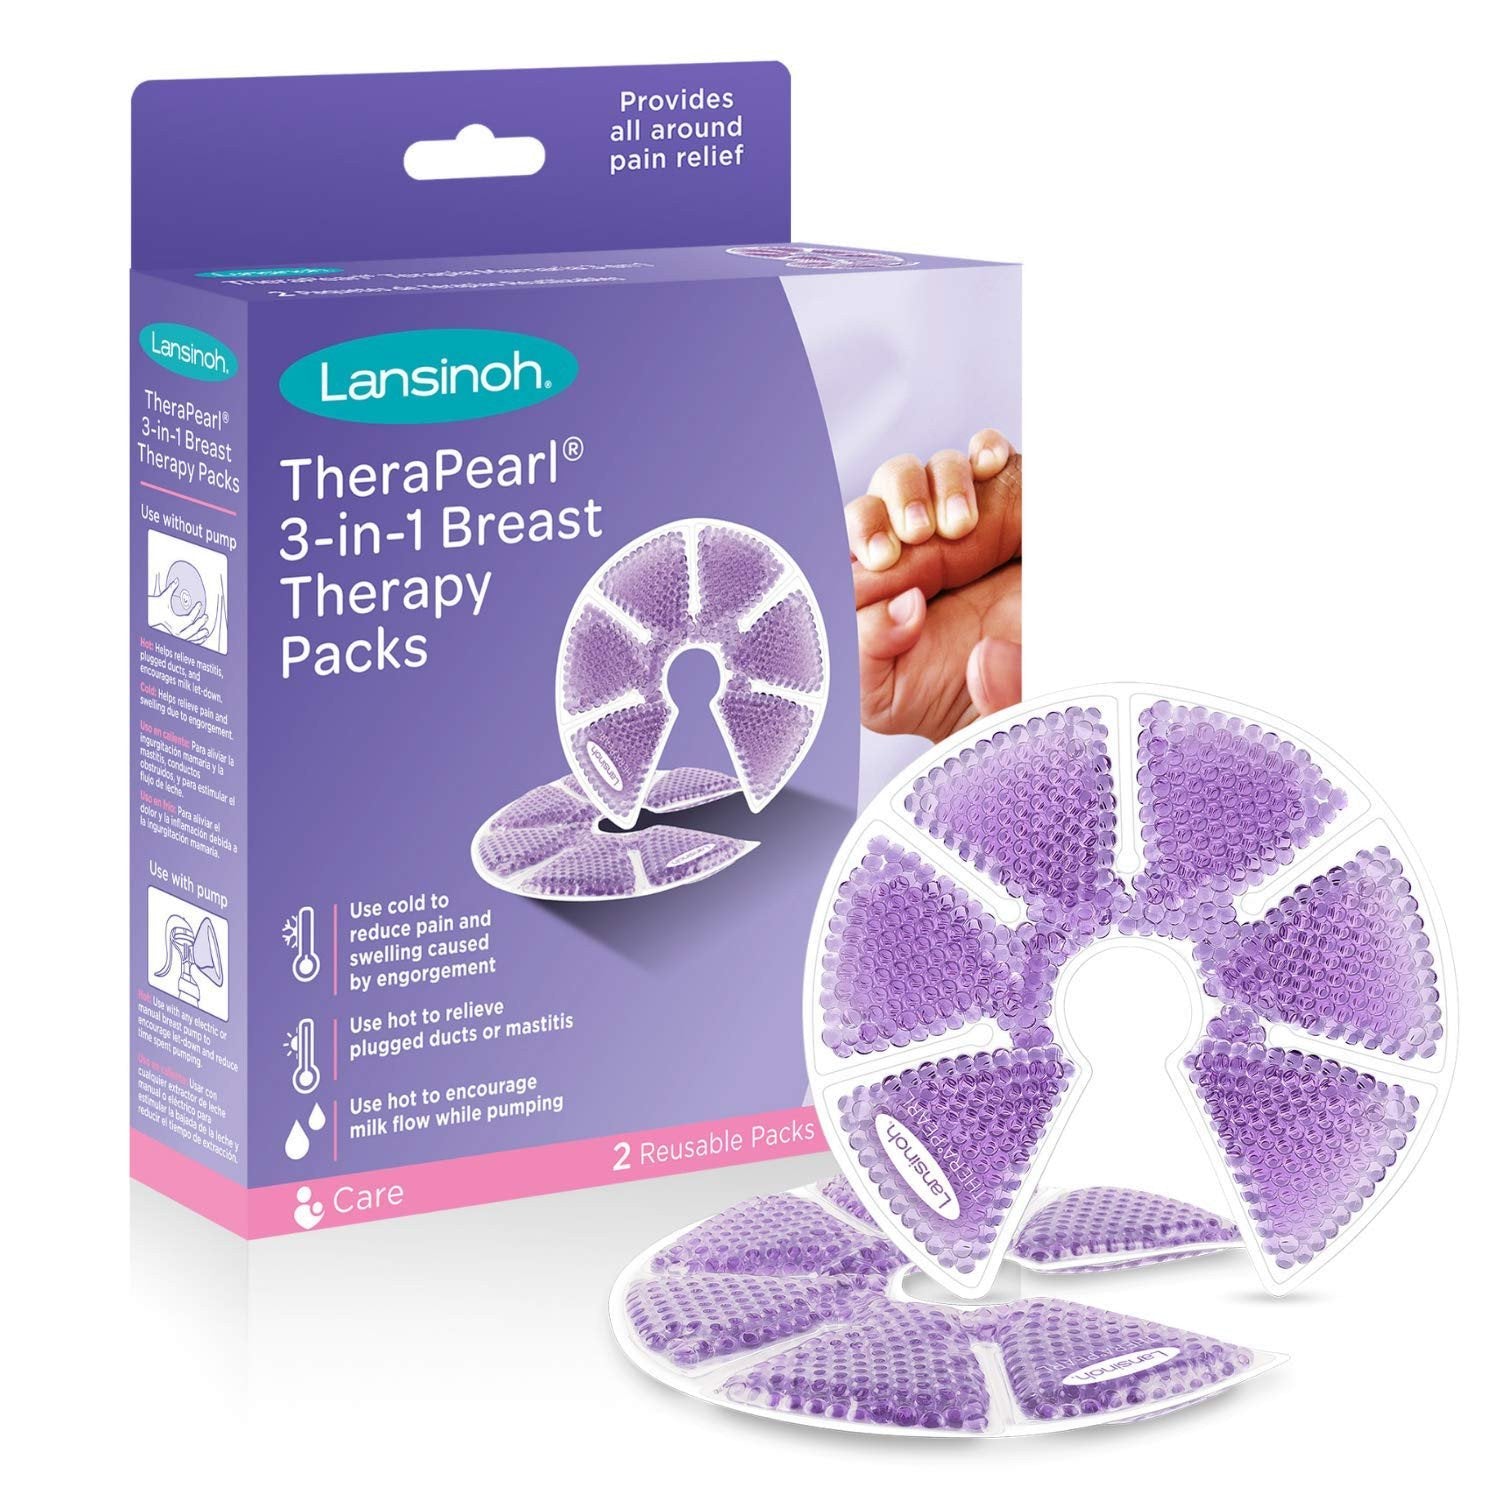 Lansinoh TheraPearl Breast Therapy Pack, 2 Pack.